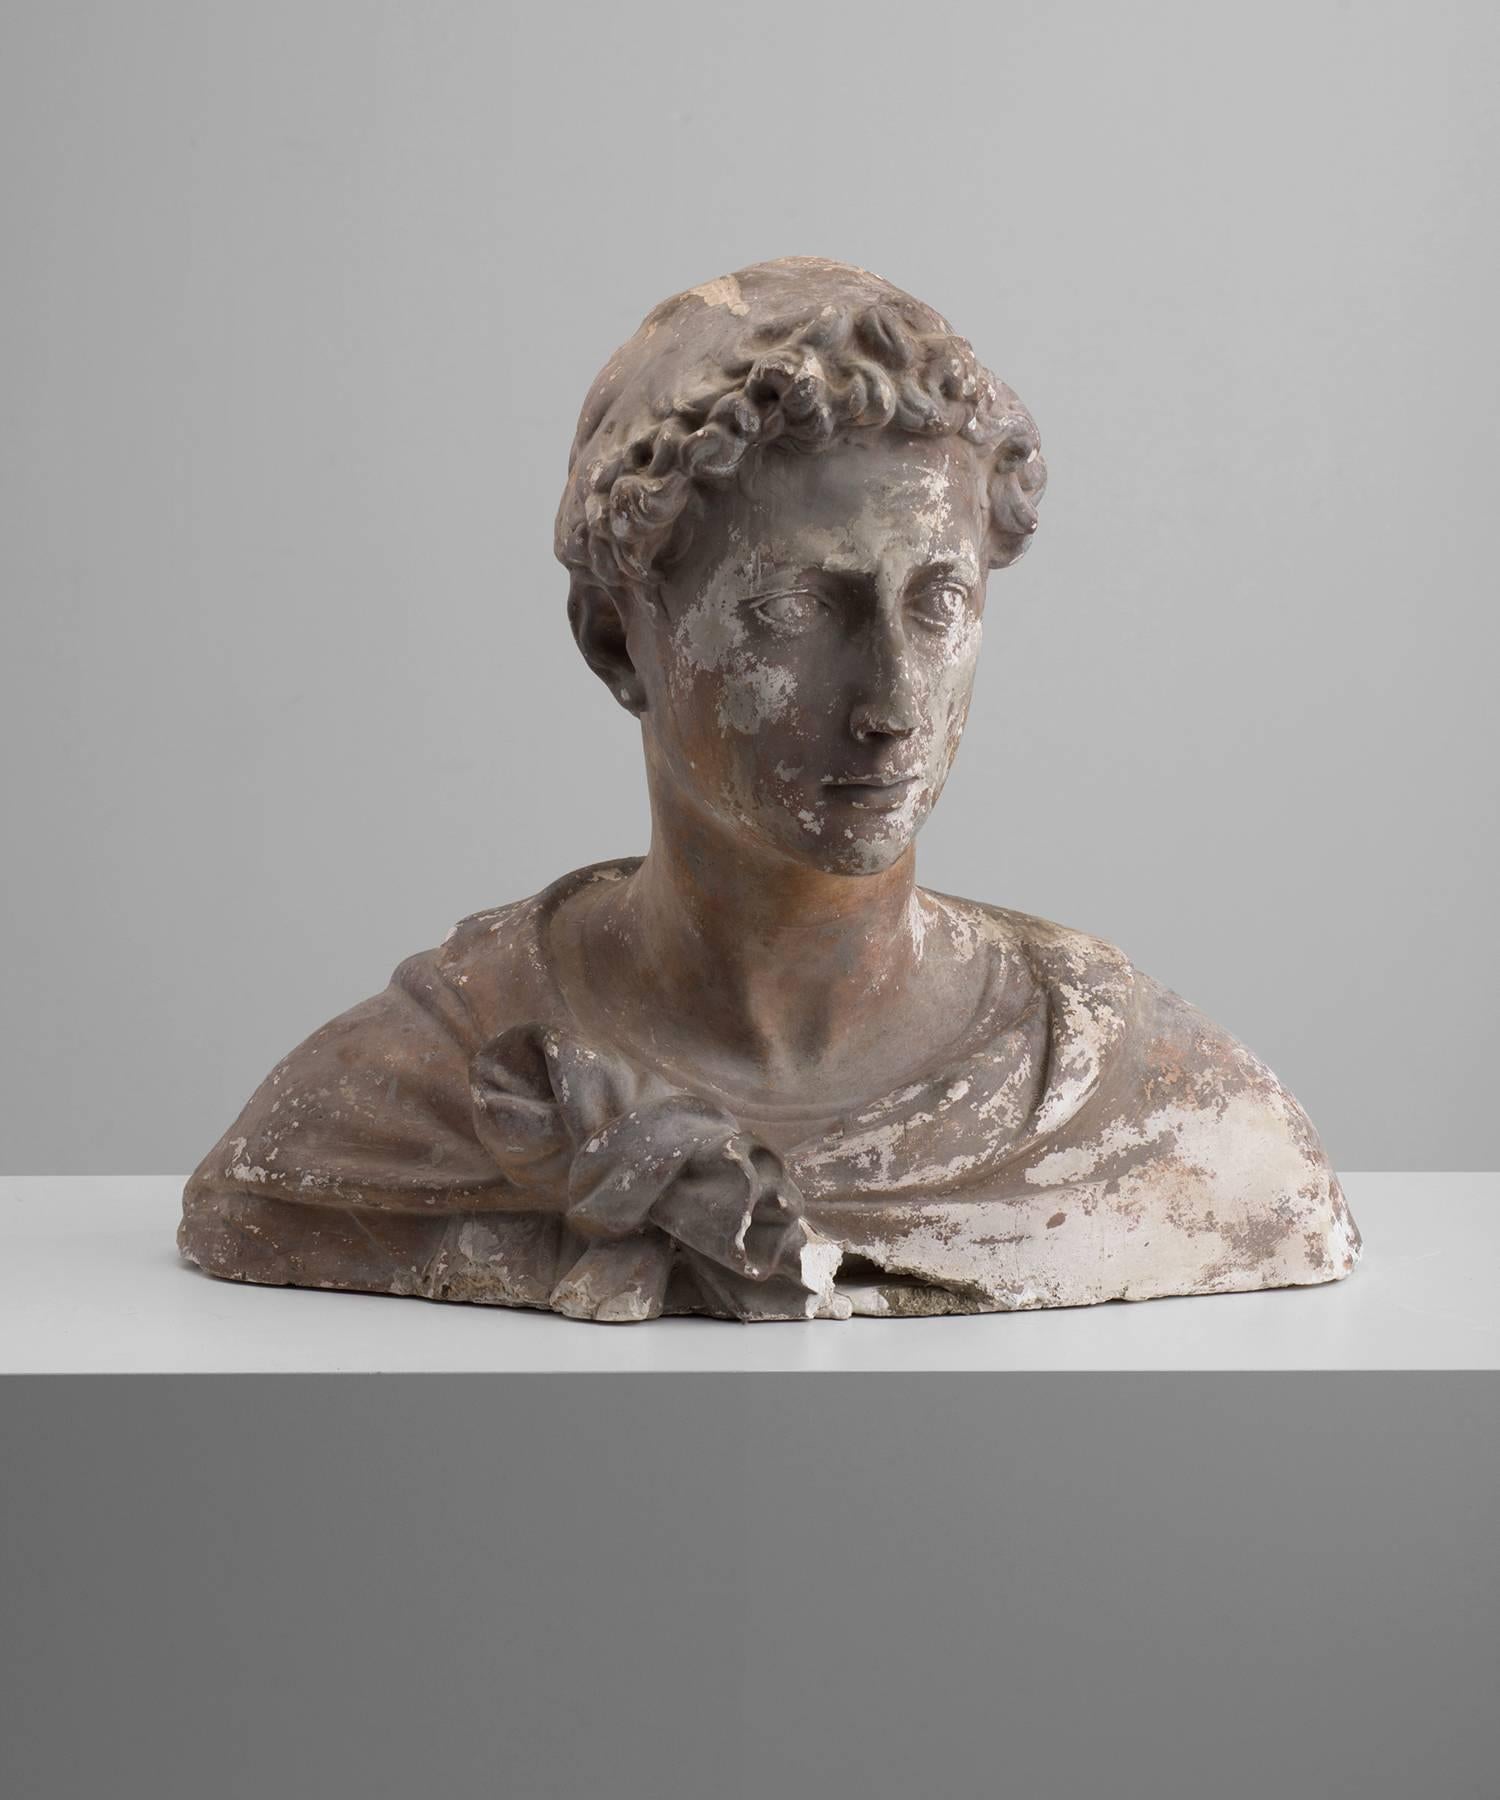 Large plaster maquette of Classical bust, circa 1860

Plaster maquette of classical youth.